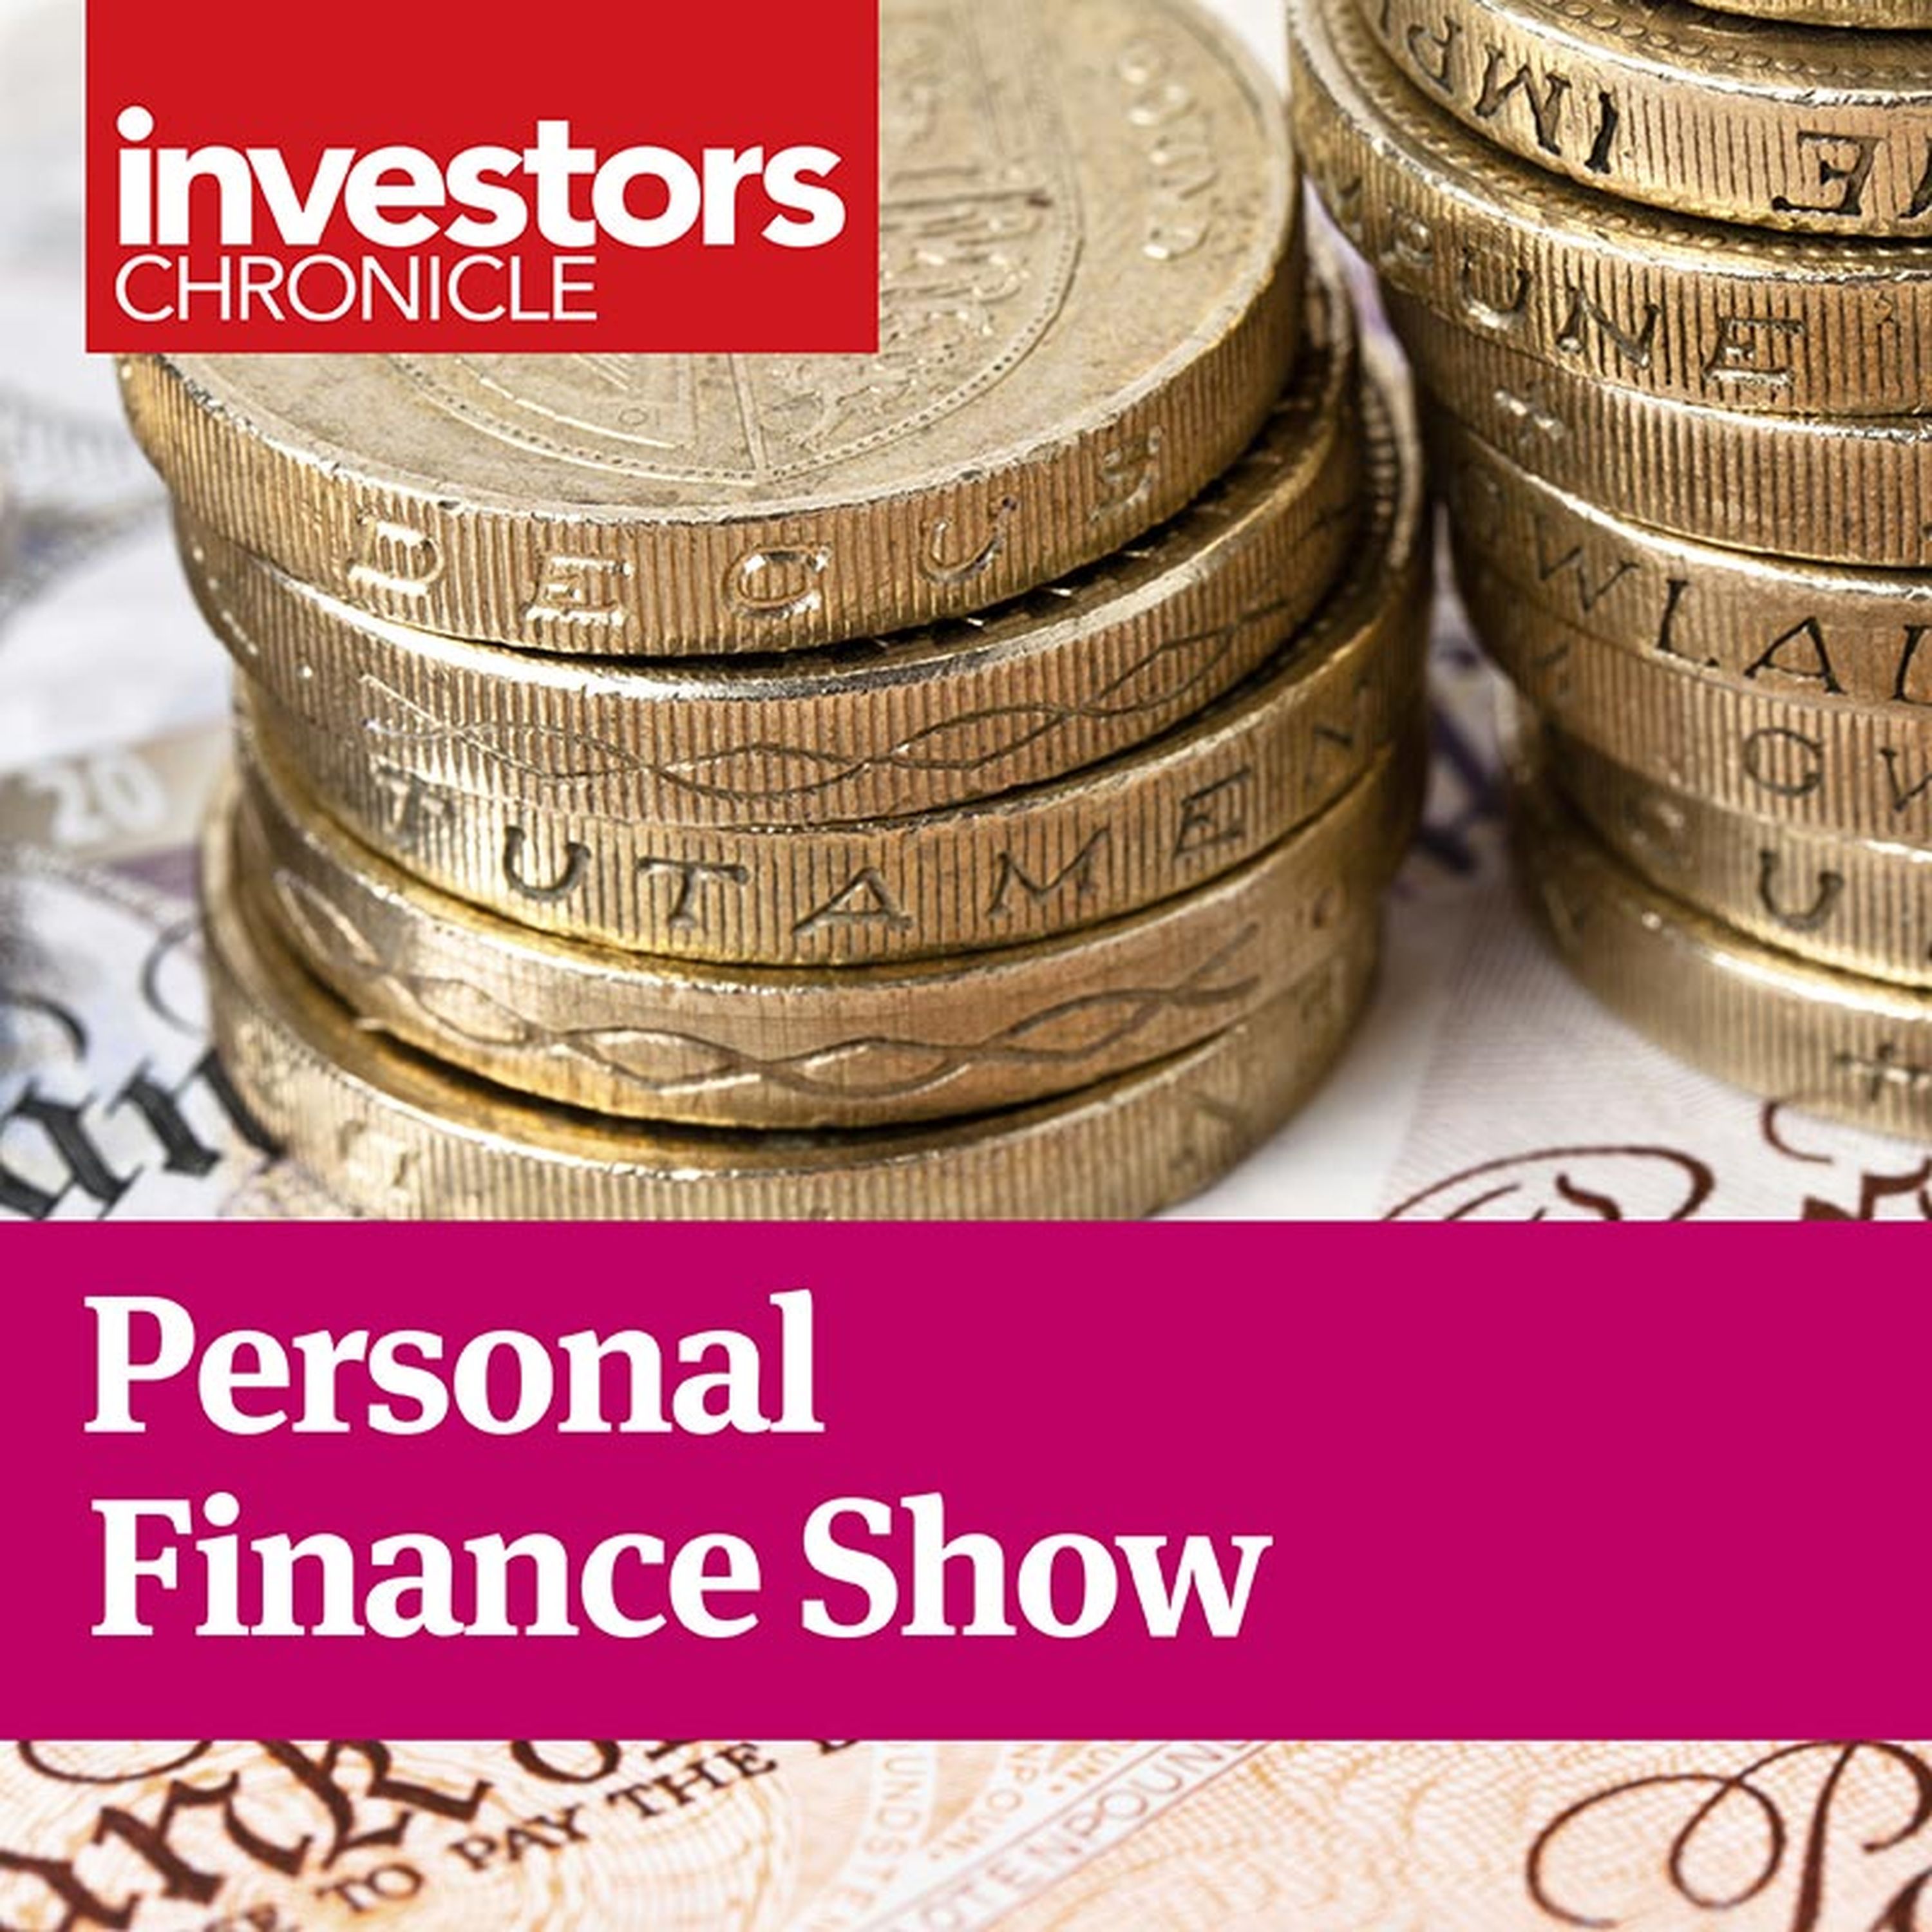 Personal Finance Show 10 June 2016